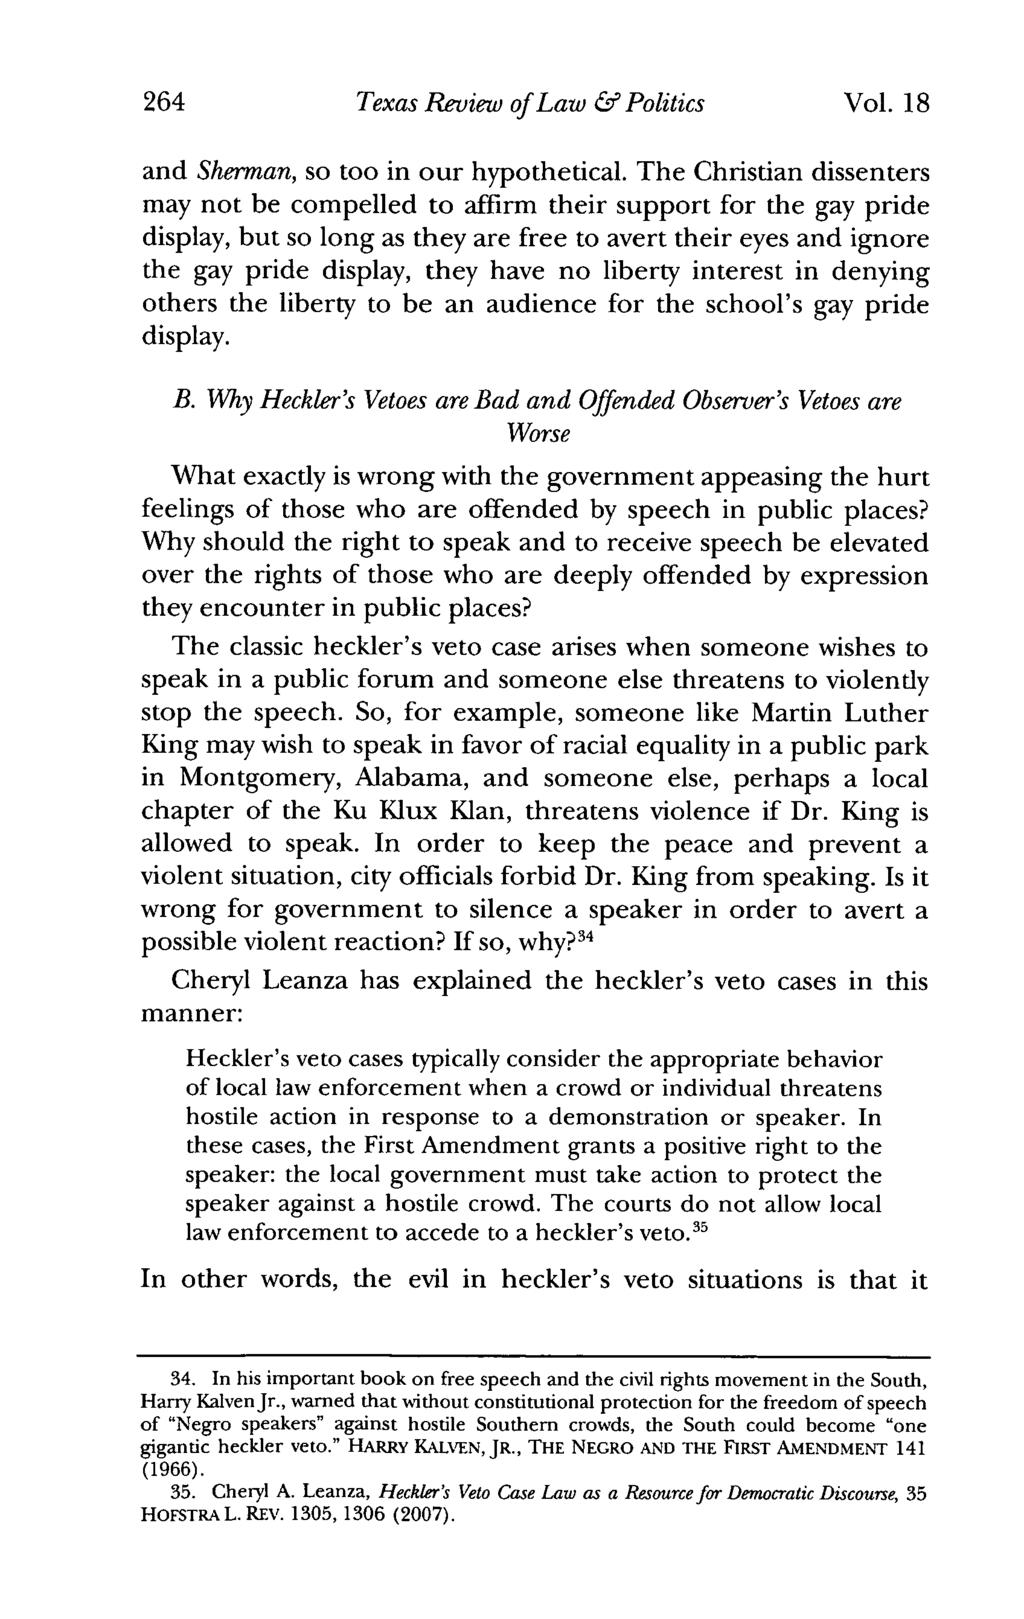 264 Texas Review of Law & Politics Vol. 18 and Shennan, so too in our hypothetical.